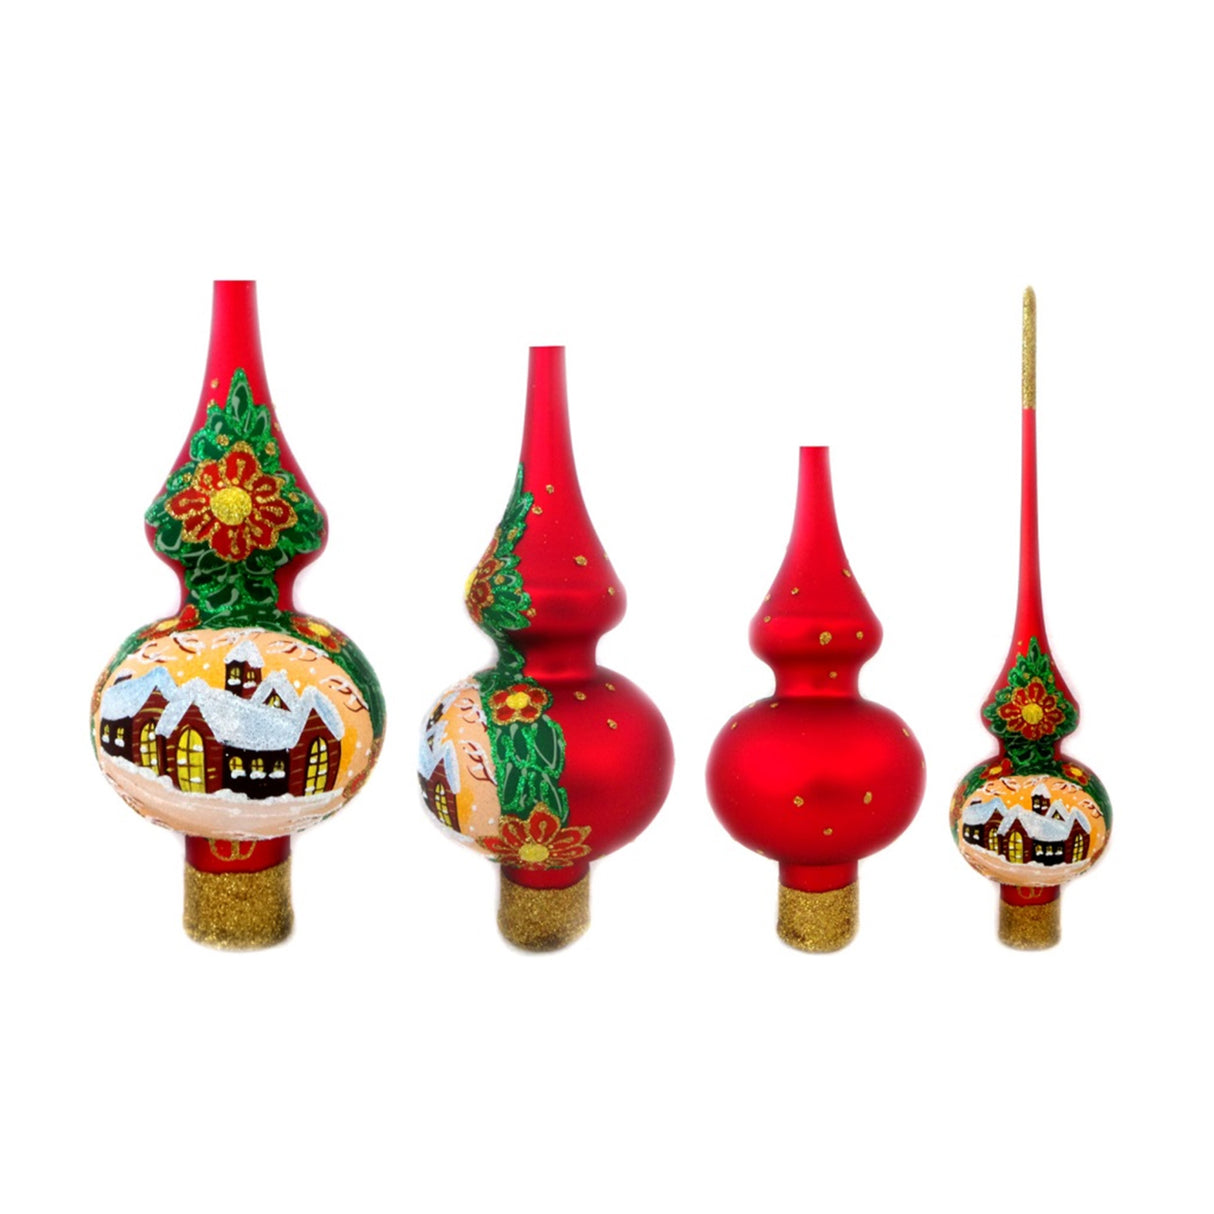 BestPysanky online gift shop sells finial star mouth blown hand made painted xmas decor decorations unique luxury collectible heirloom vintage whimsical elegant festive balls baubles old fashioned european german collection artisan hanging pendants personalized